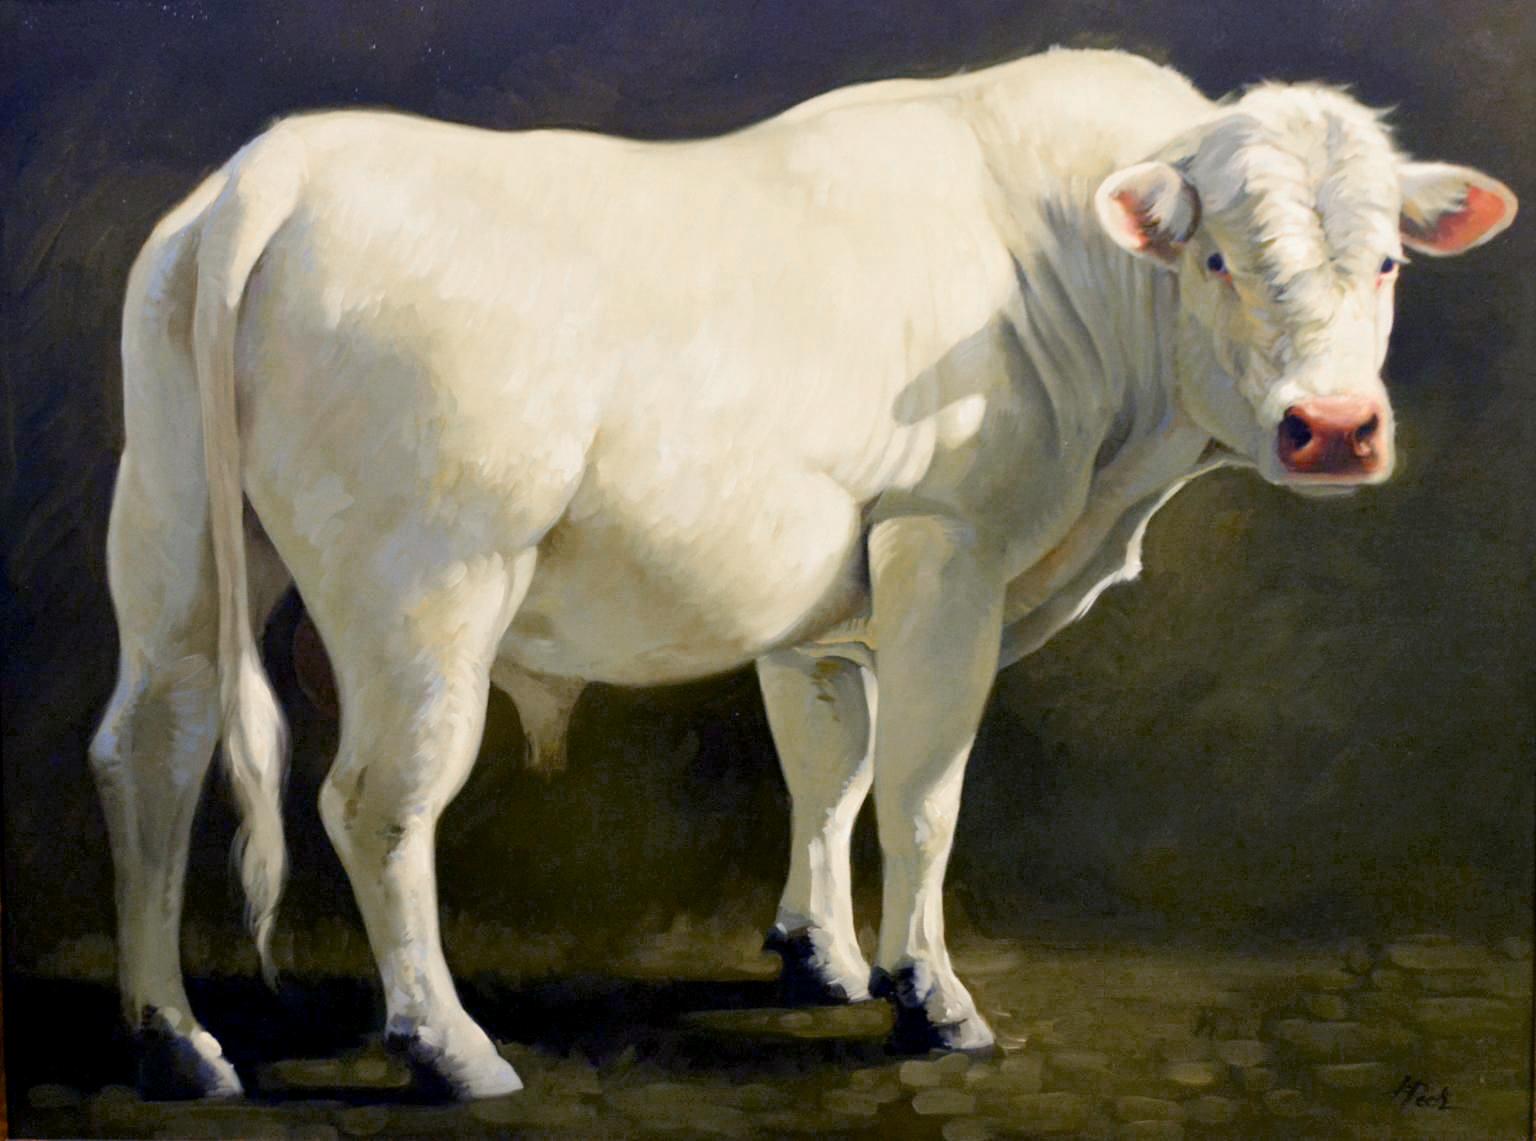 "French White", is a 30x40 oil painting on canvas by artist Leslie Peck featuring a majestic white bull standing in a stately, regal pose. A dark background with a grass covered foreground provides drama and mystery.  Peck's use of hand-mixed paint